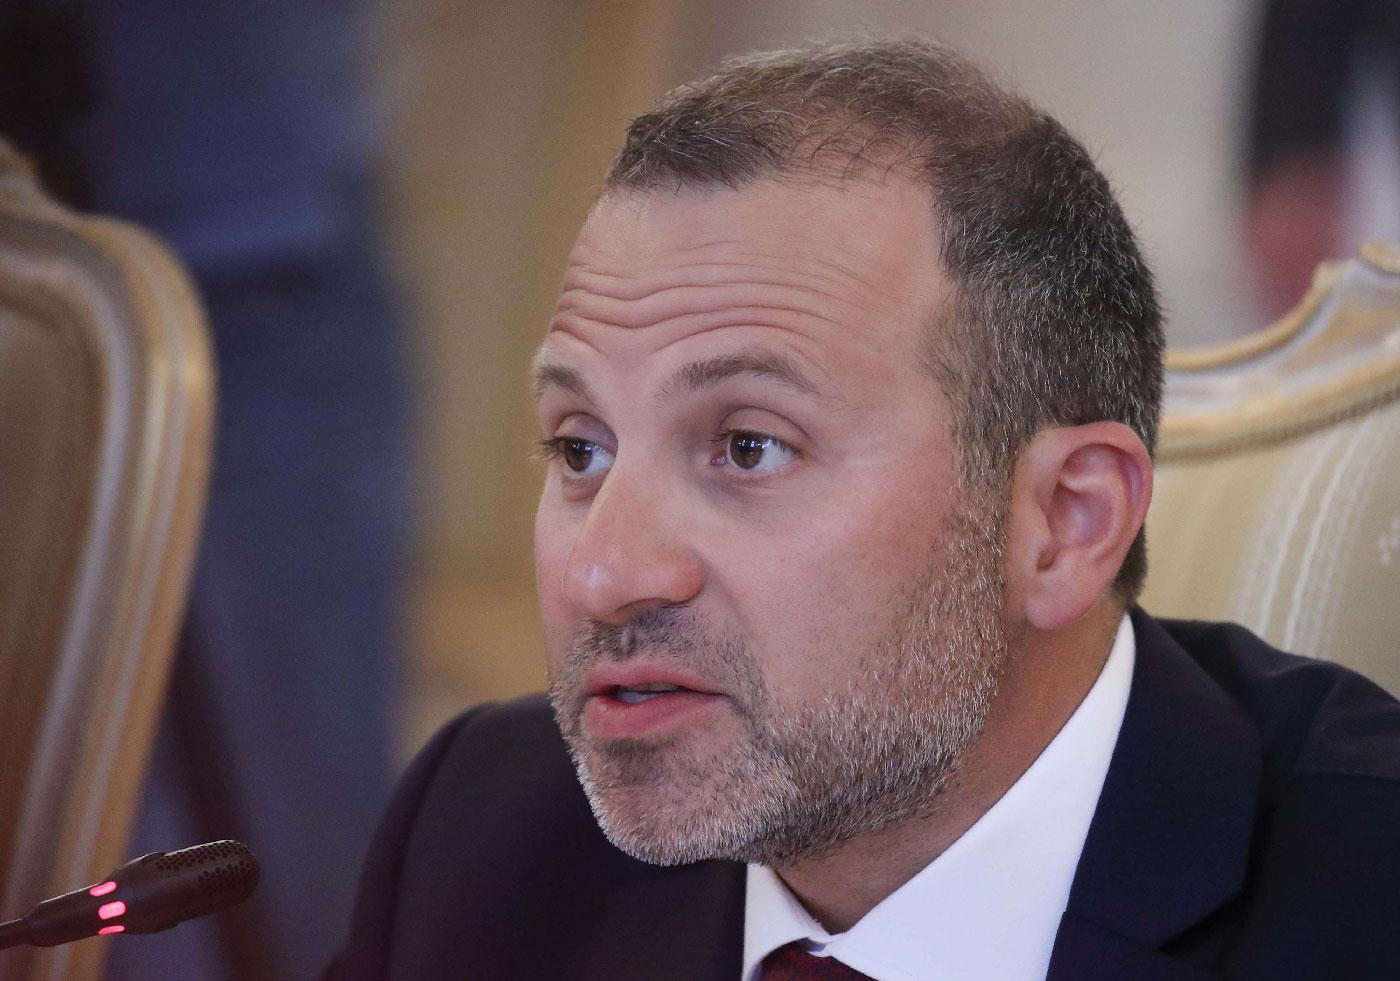 Bassil has been one of protesters' main targets during the demonstrations in Lebanon